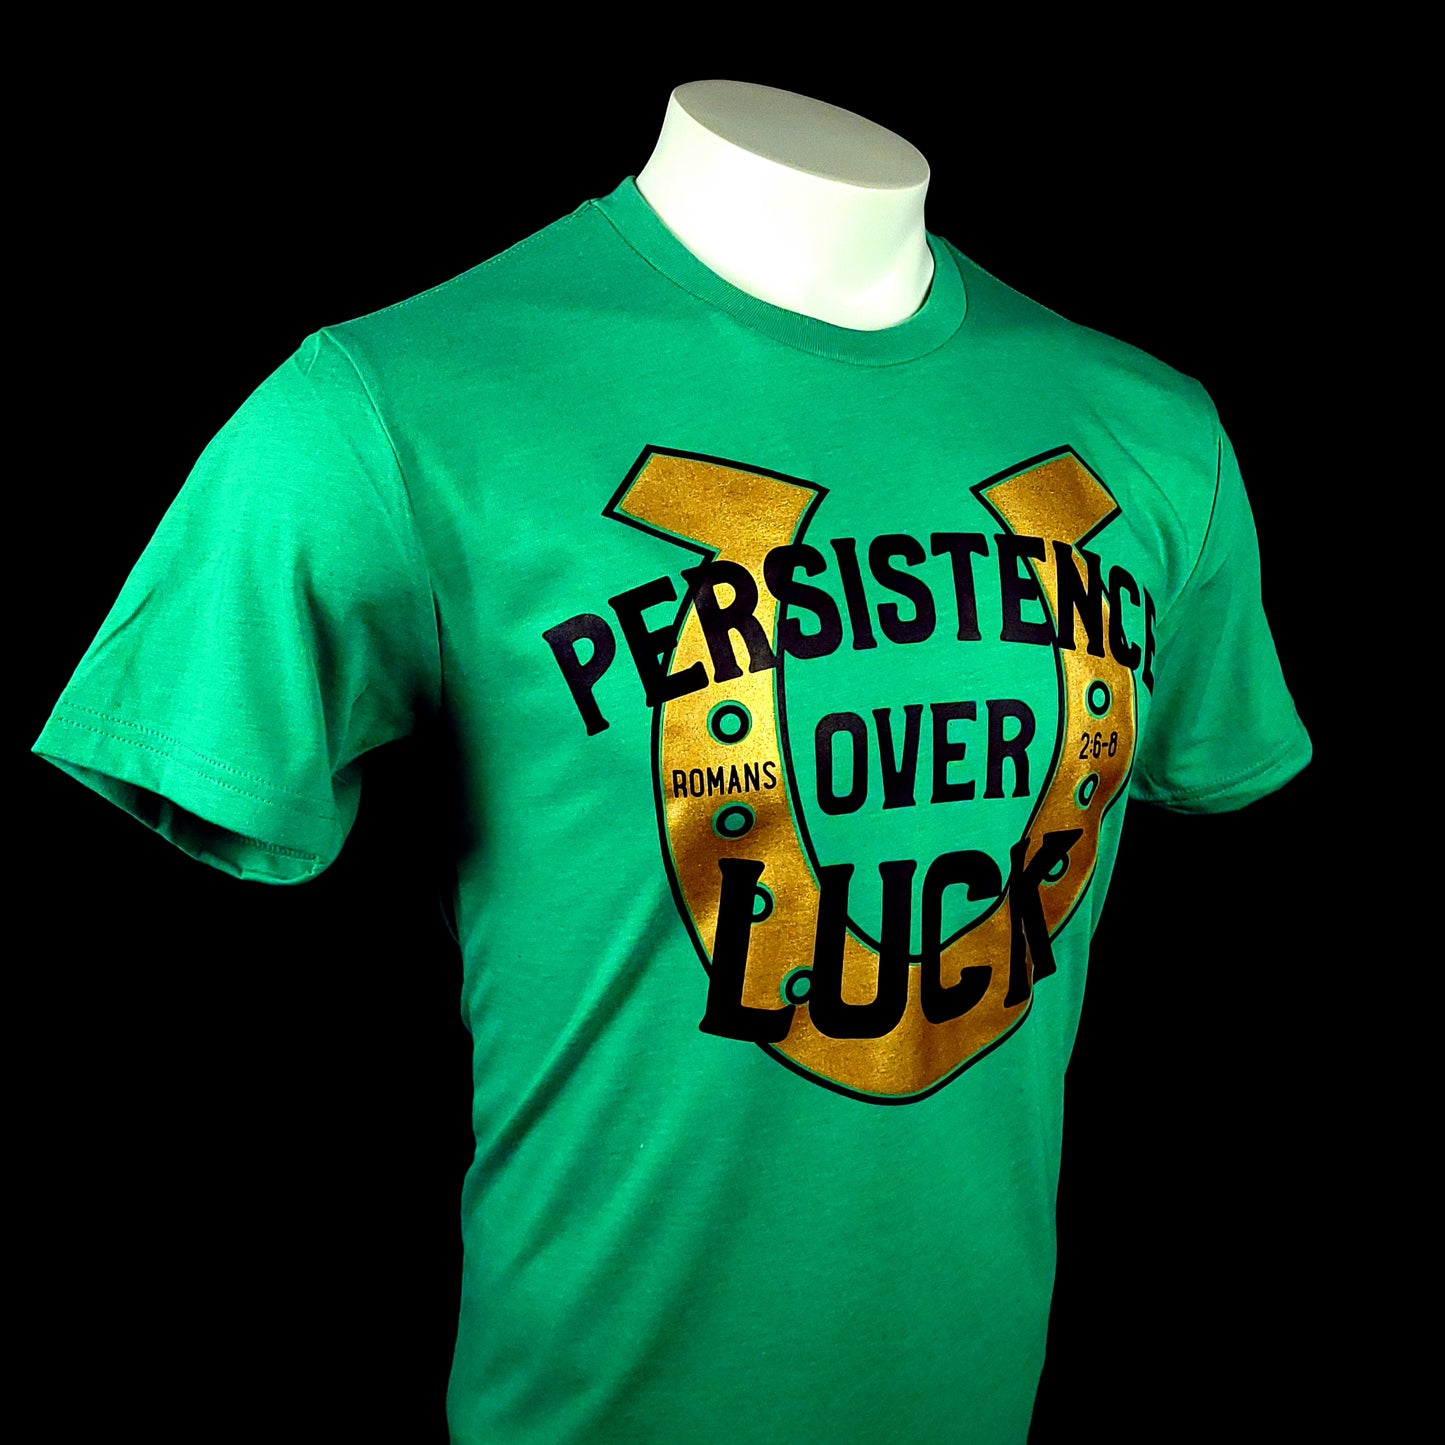 PERSISTENCE OVER LUCK